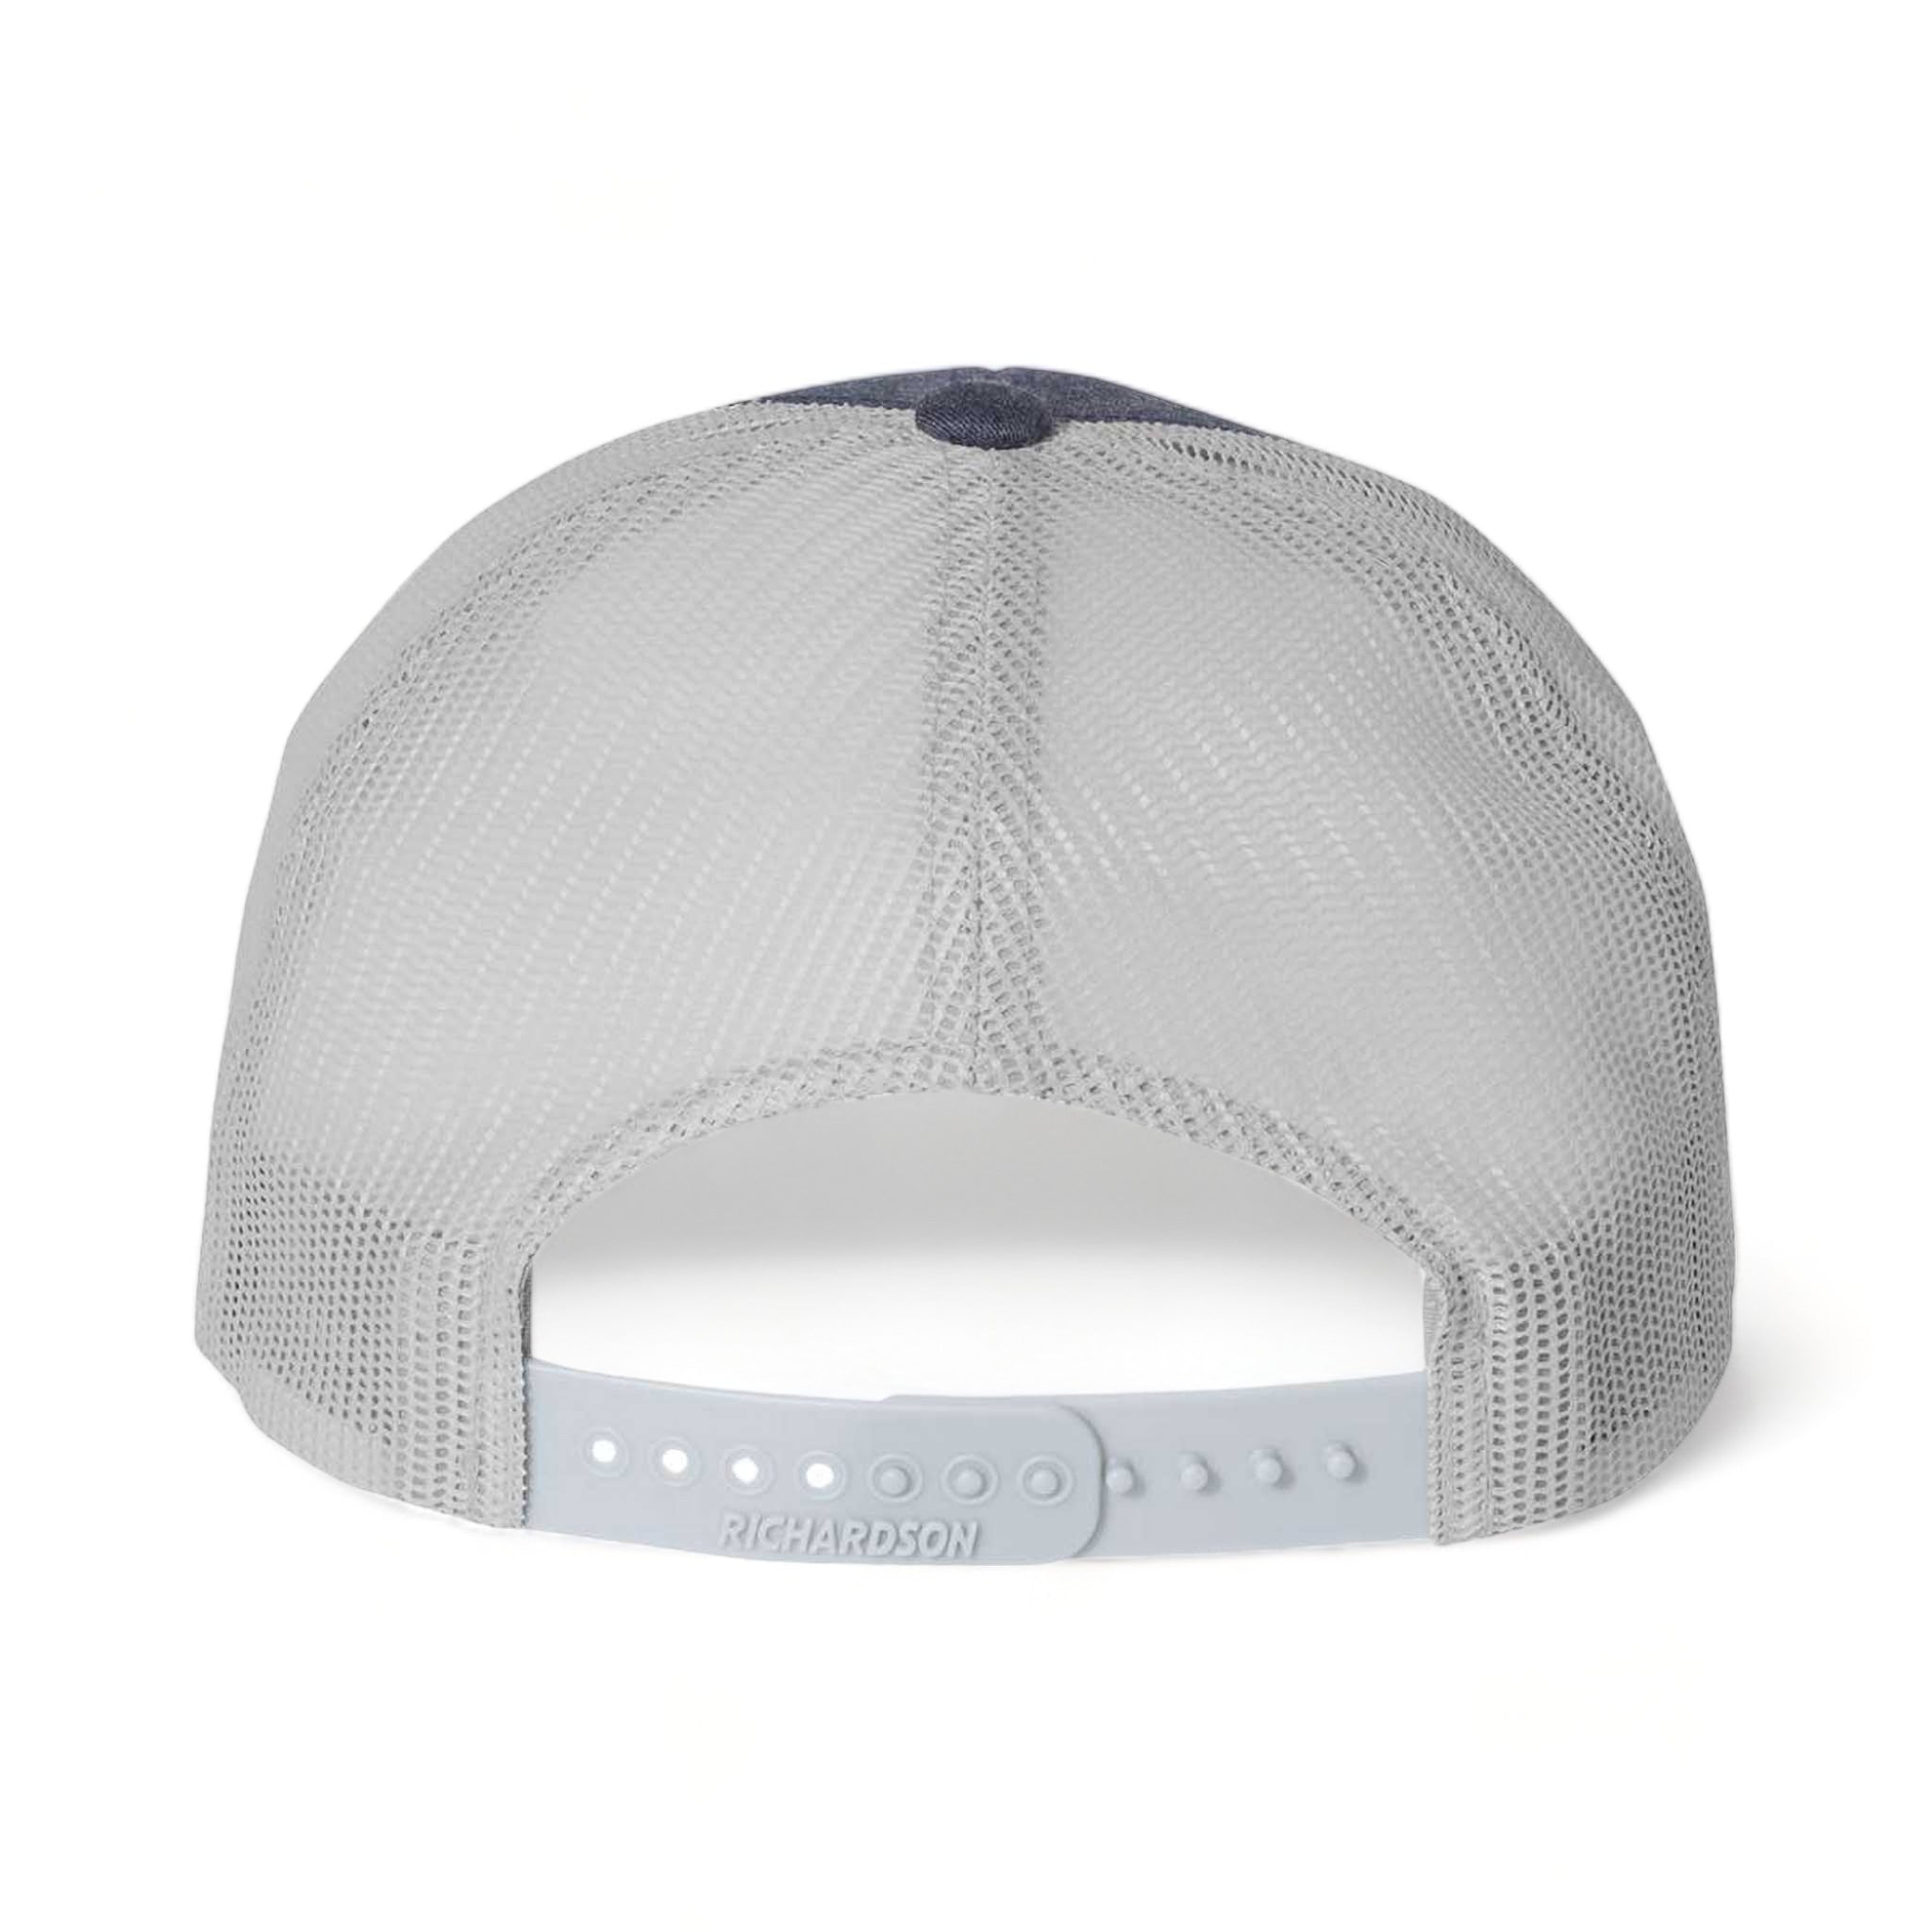 Back view of Richardson 115 custom hat in heather navy and silver